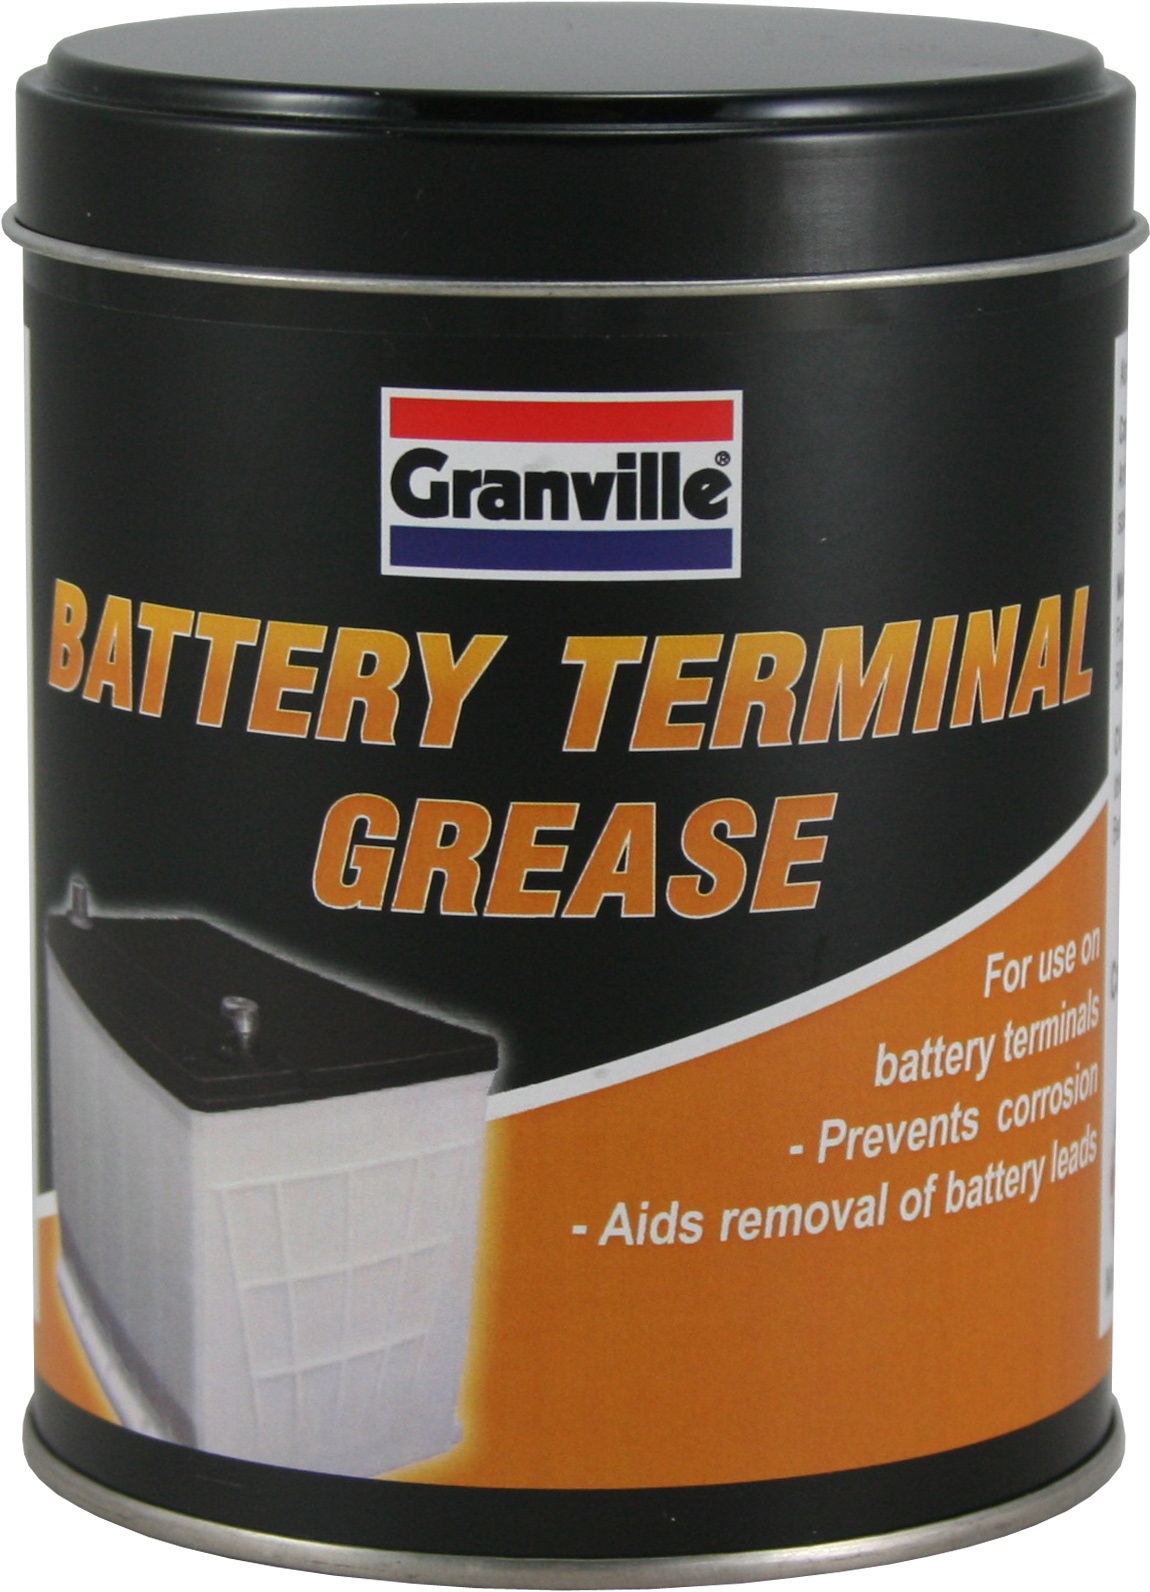 Granville 0381 Battery Terminal Grease 500g